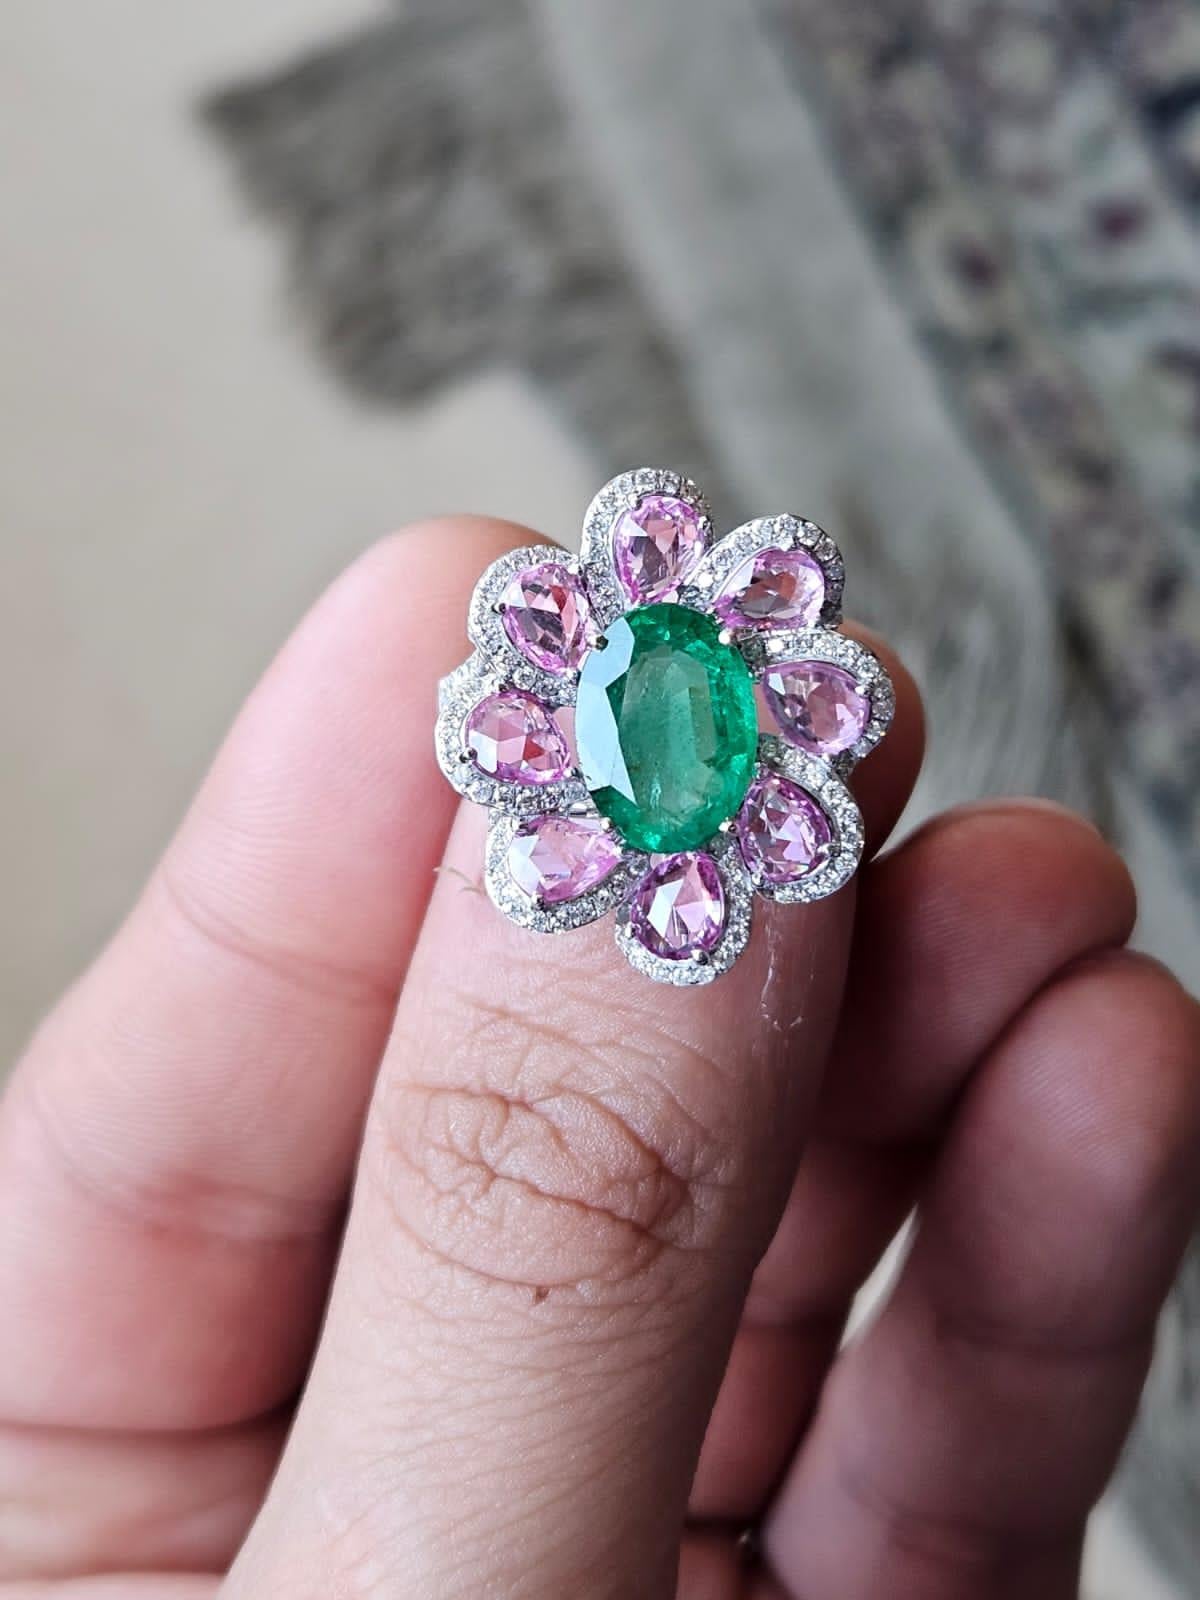 A very gorgeous and beautiful, Emerald & Pink Sapphire Cocktail Ring set in 18K Rose Gold & Diamonds. The weight of the oval shaped Emerald is 2.85 carats. The Emerald is completely natural, without any treatment and is of Zambian origin. The weight